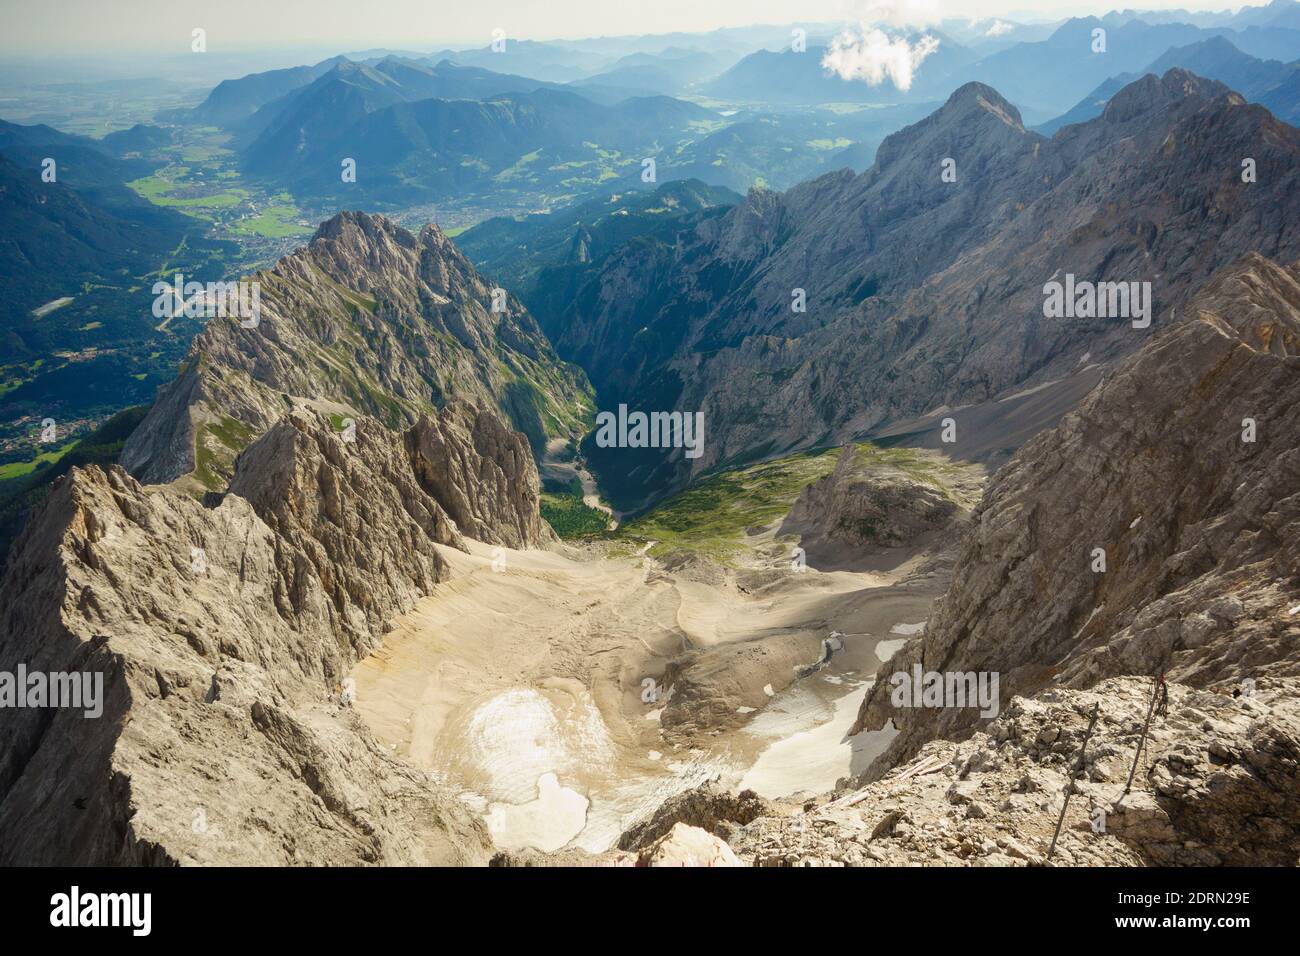 The Zugspitze highest peak of the Wetterstein Mountains, & highest mountain in Germany. Lies south of the town of Garmisch-Partenkirchen. Stock Photo